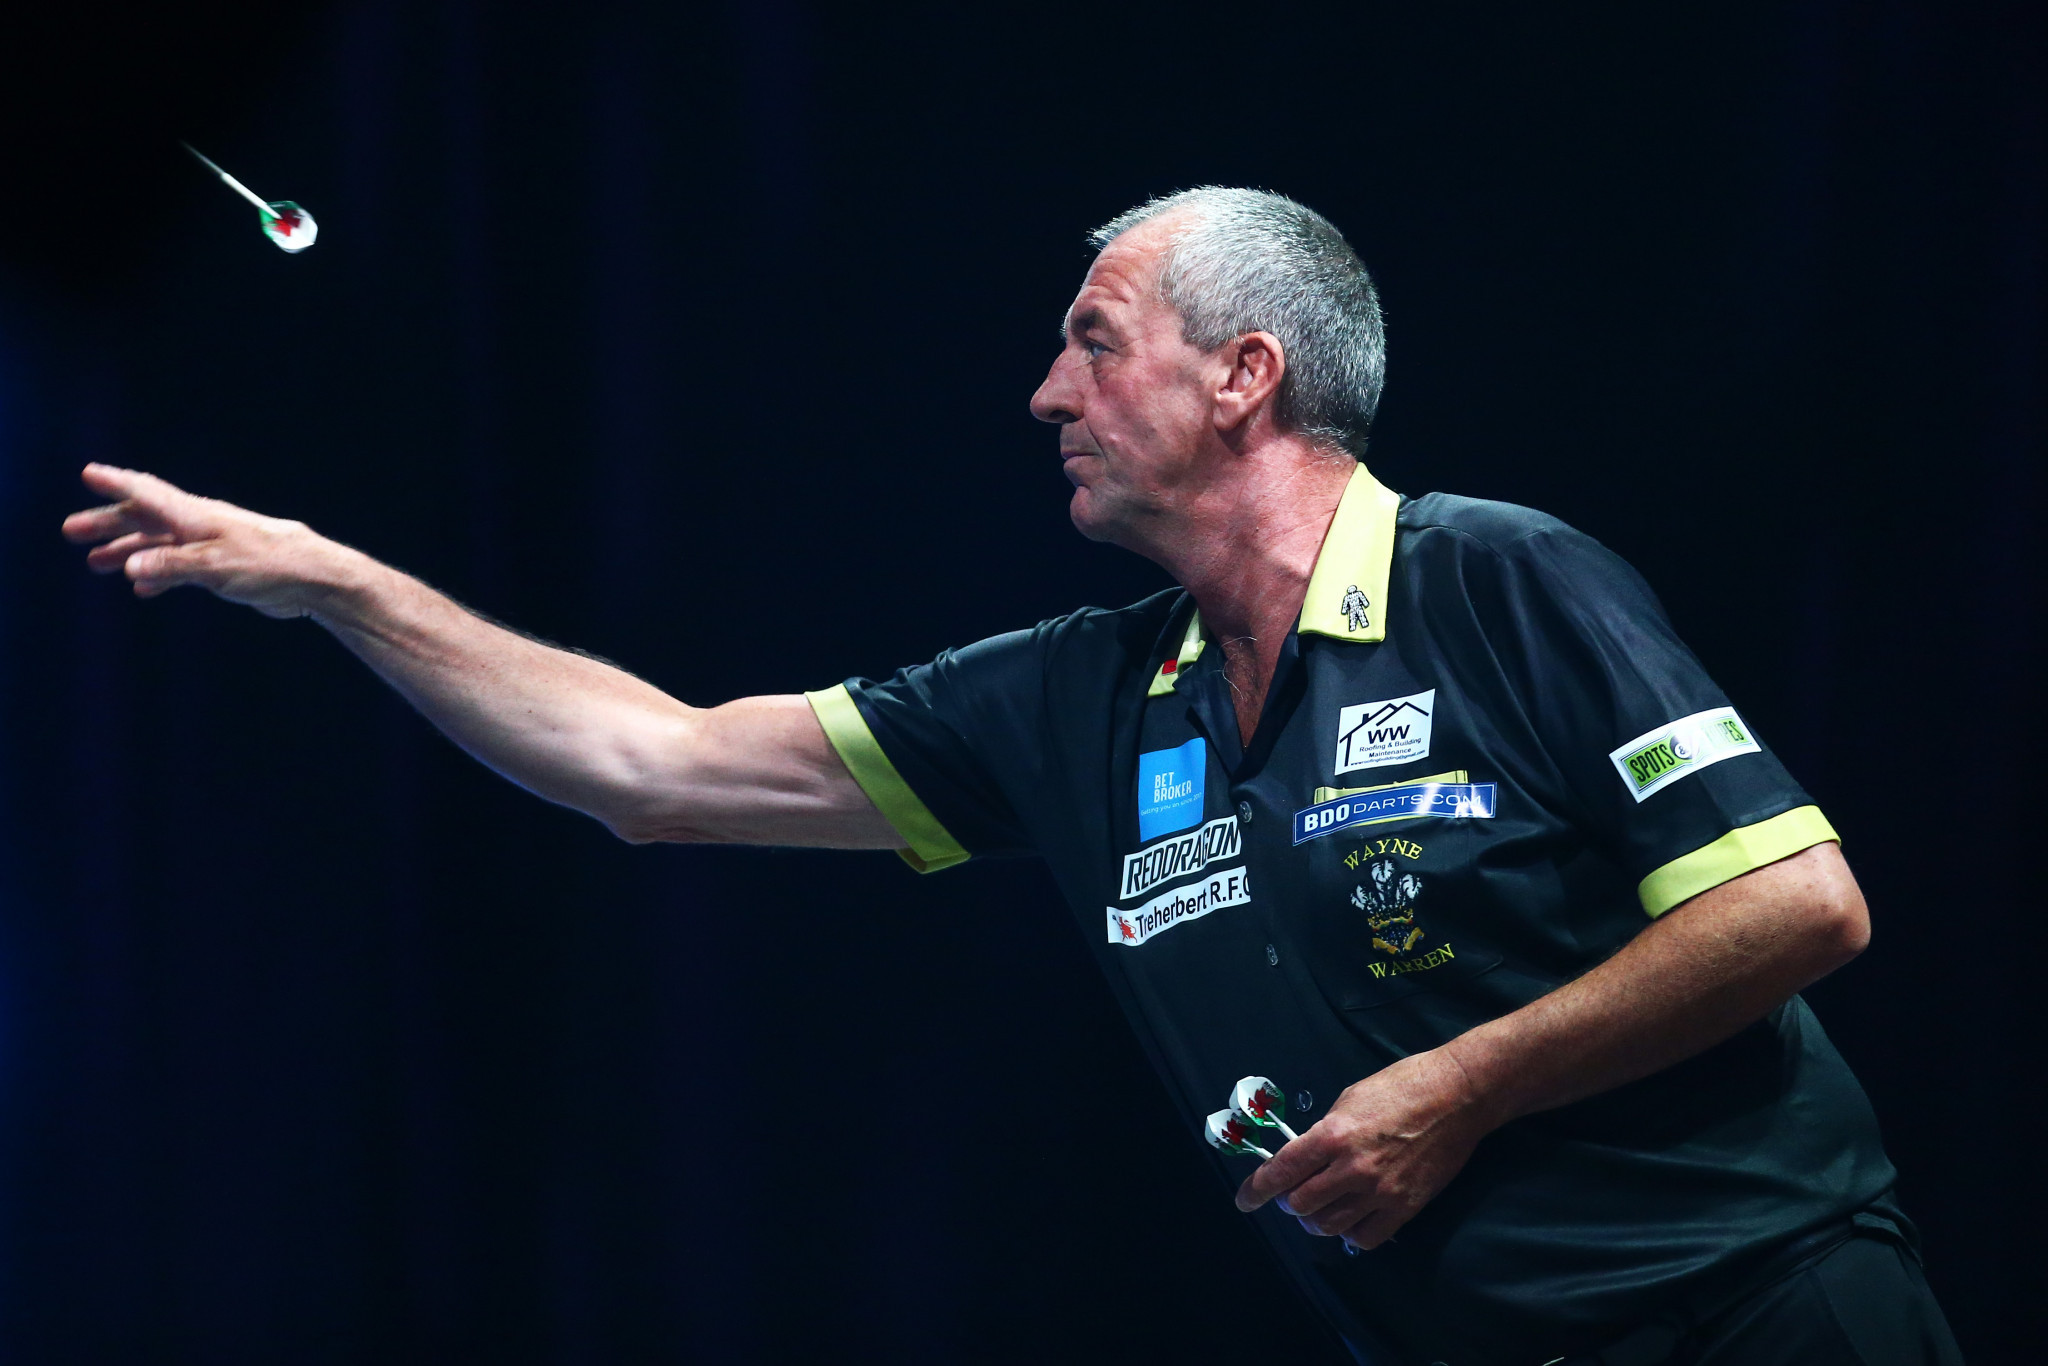 Wayne Warren of Wales won the last edition of the men's BDO World Championship in 2020 ©Getty Images